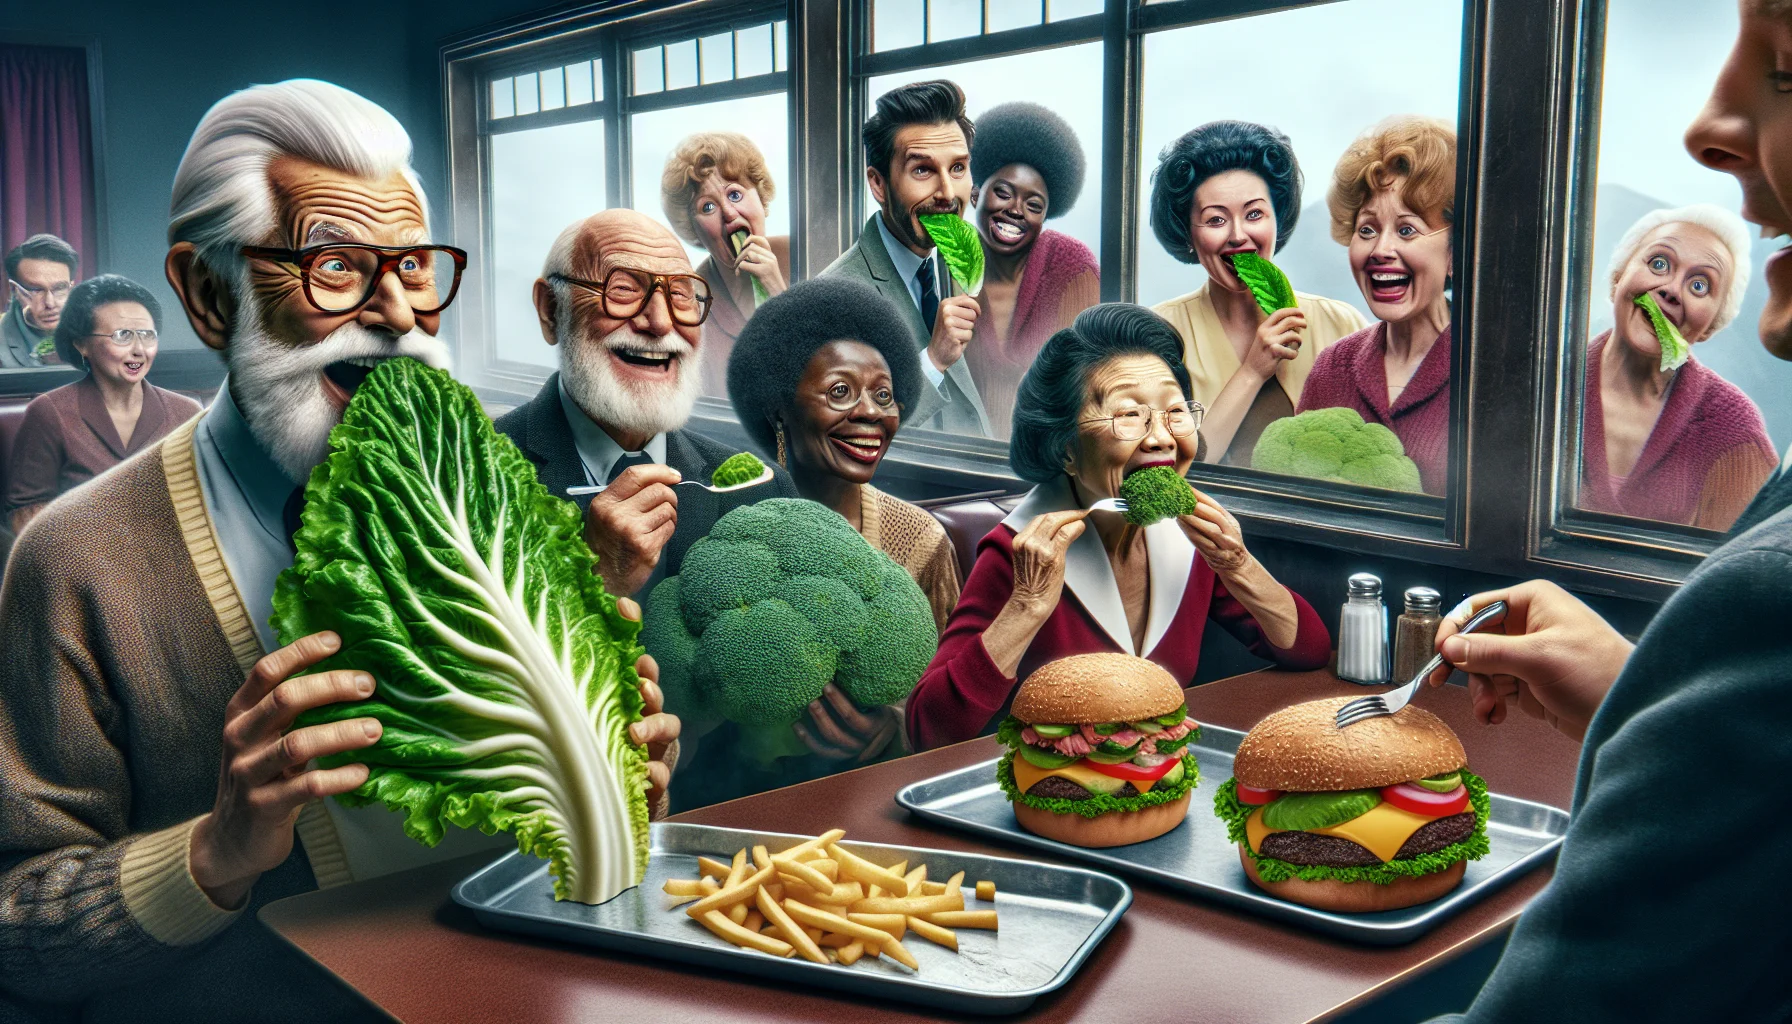 Imagine a humorous scene in a vintage cafeteria setting. In one corner, a jovial, elderly Caucasian man with a neatly trimmed beard is holding a giant, crunchy lettuce leaf as one would a newspaper, squinting his eyes as if trying to read it. Next to him, an elderly Black woman, wearing glasses and a warm smile, is attempting to 'peel' a broccoli stalk with a fruit peeler. And in the background, an Asian elderly woman is biting into an avocado as if it were an apple, her face showing mixed expressions of surprise and delight. Through the window, a floating burger and fries are looking at the scene from outside with sad faces, hinting at the high fiber, low-carb keto diet.